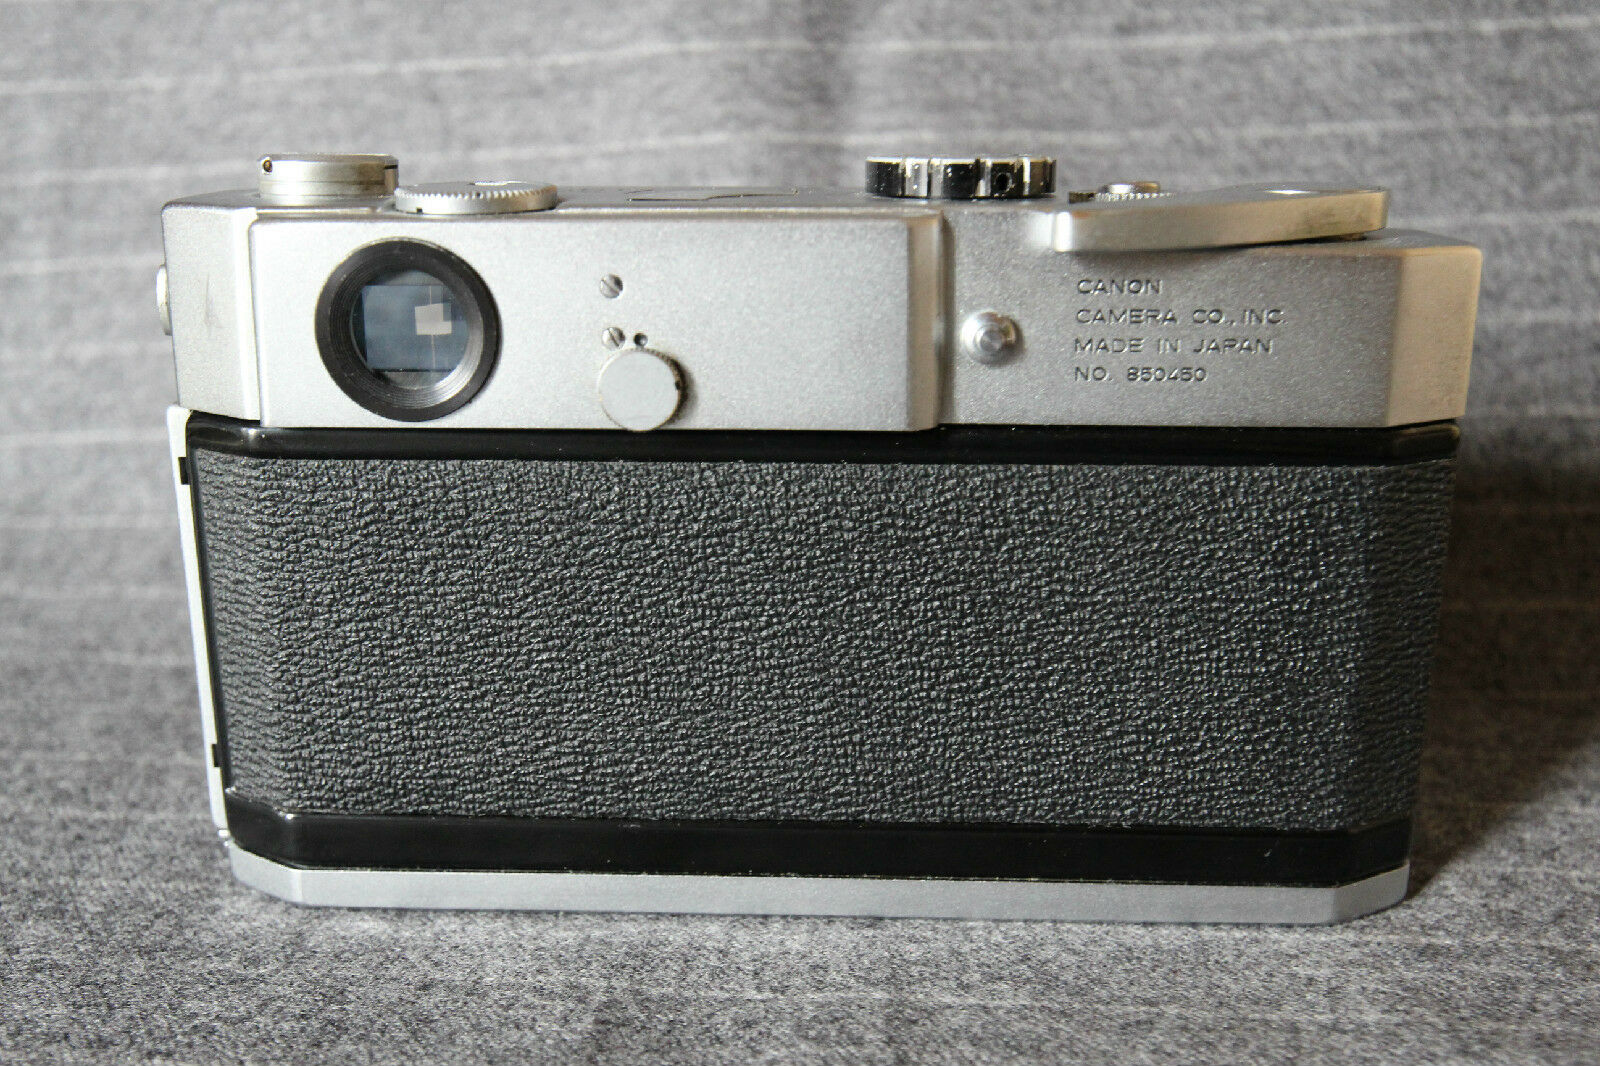 Canon F1 Camera Serial Numbers